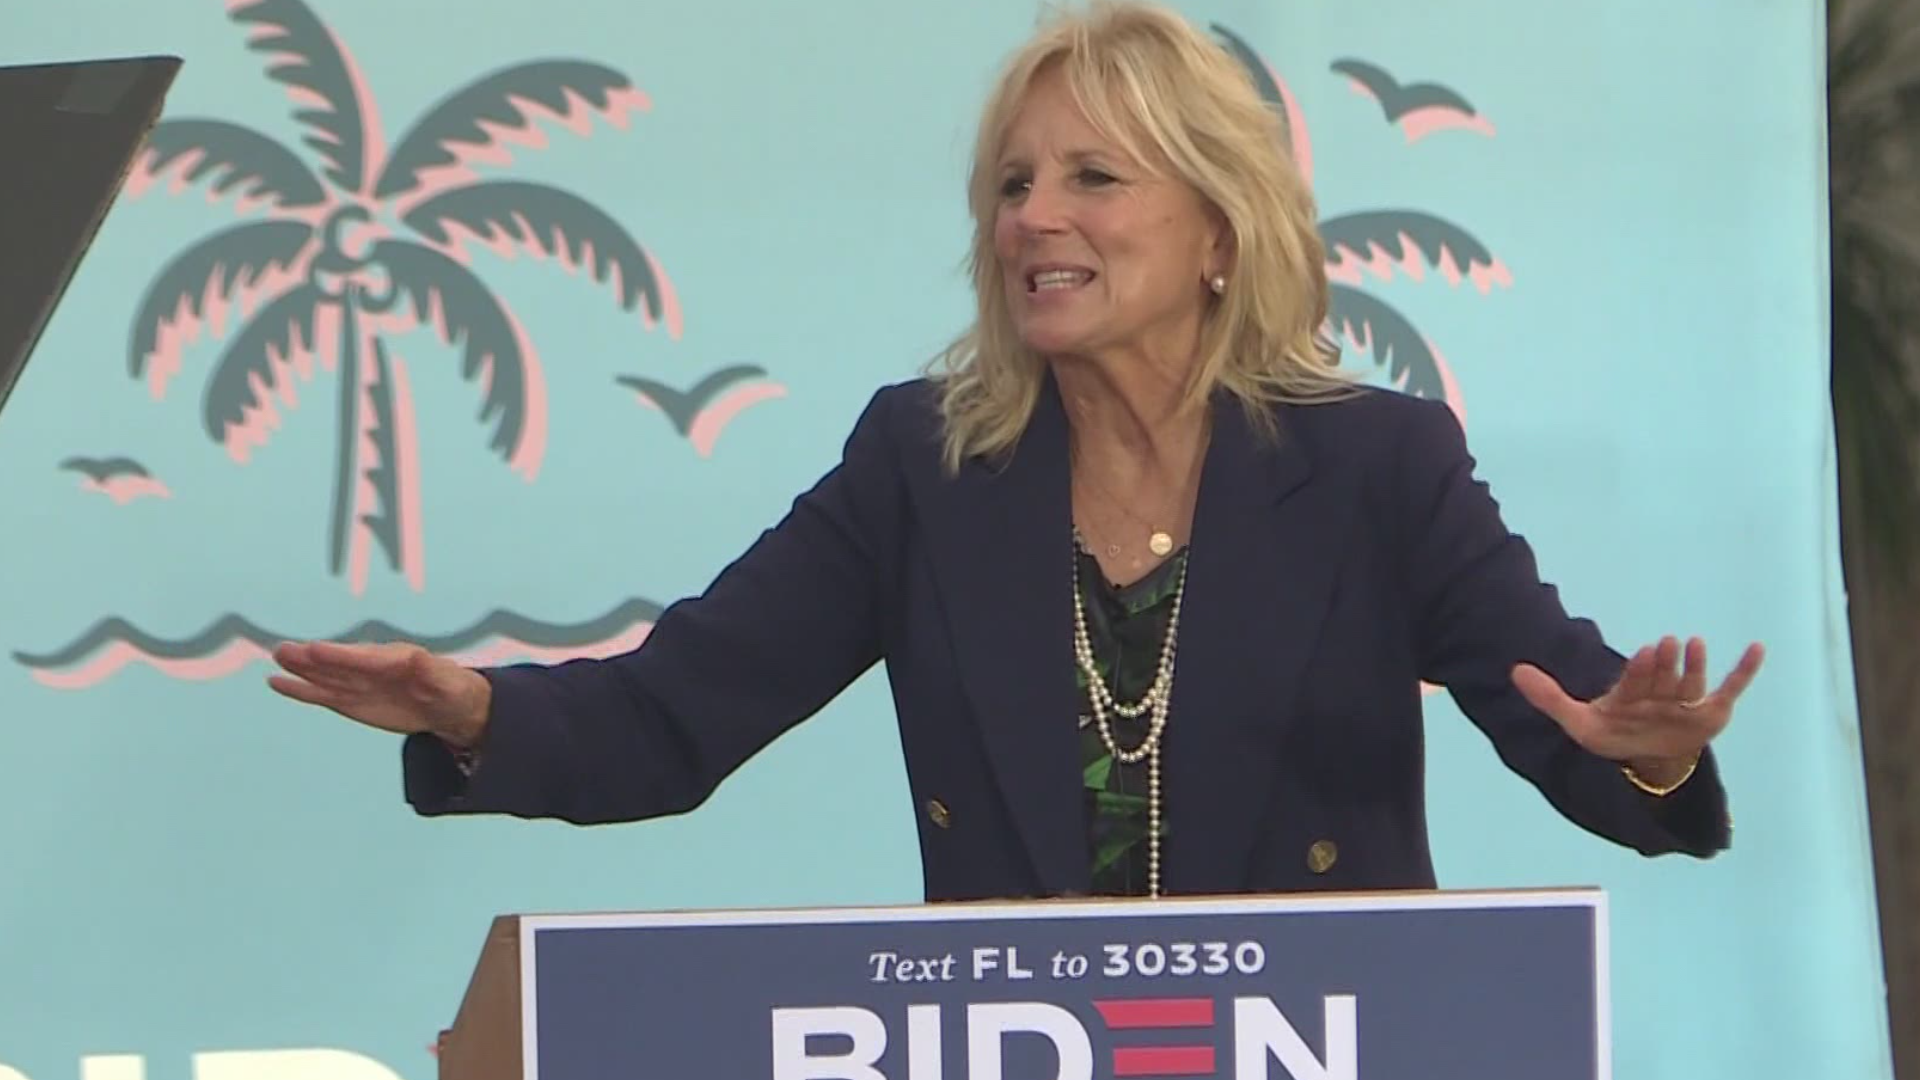 Dr. Biden told Florida voters, “our voices are more powerful than we know.”